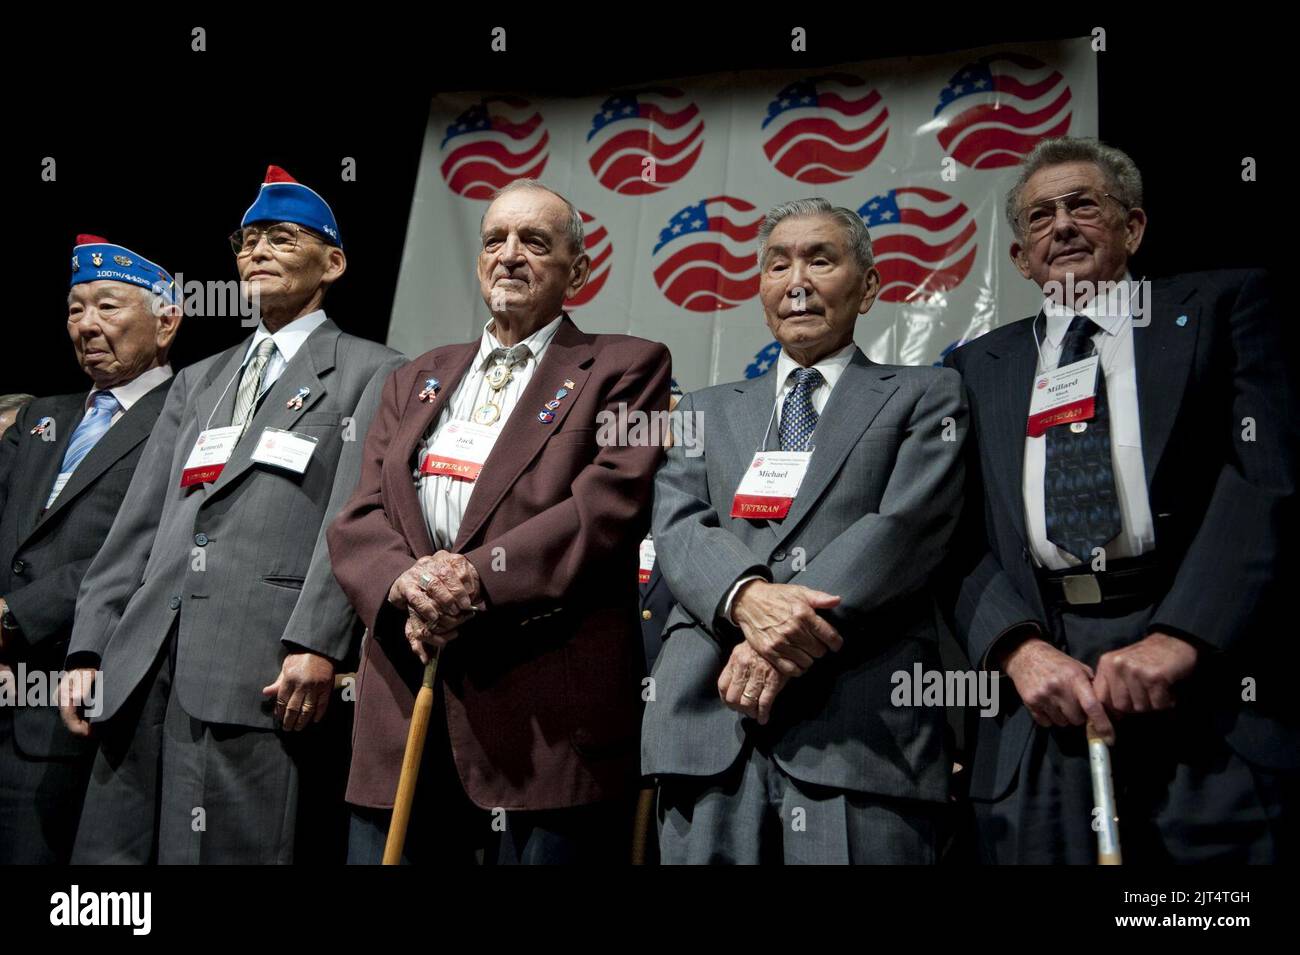 U.S. Army veterans from the 141st Infantry Regiment and the 442nd Regimental Combat Team stand during the 65th Anniversary Tribute dinner. Stock Photo